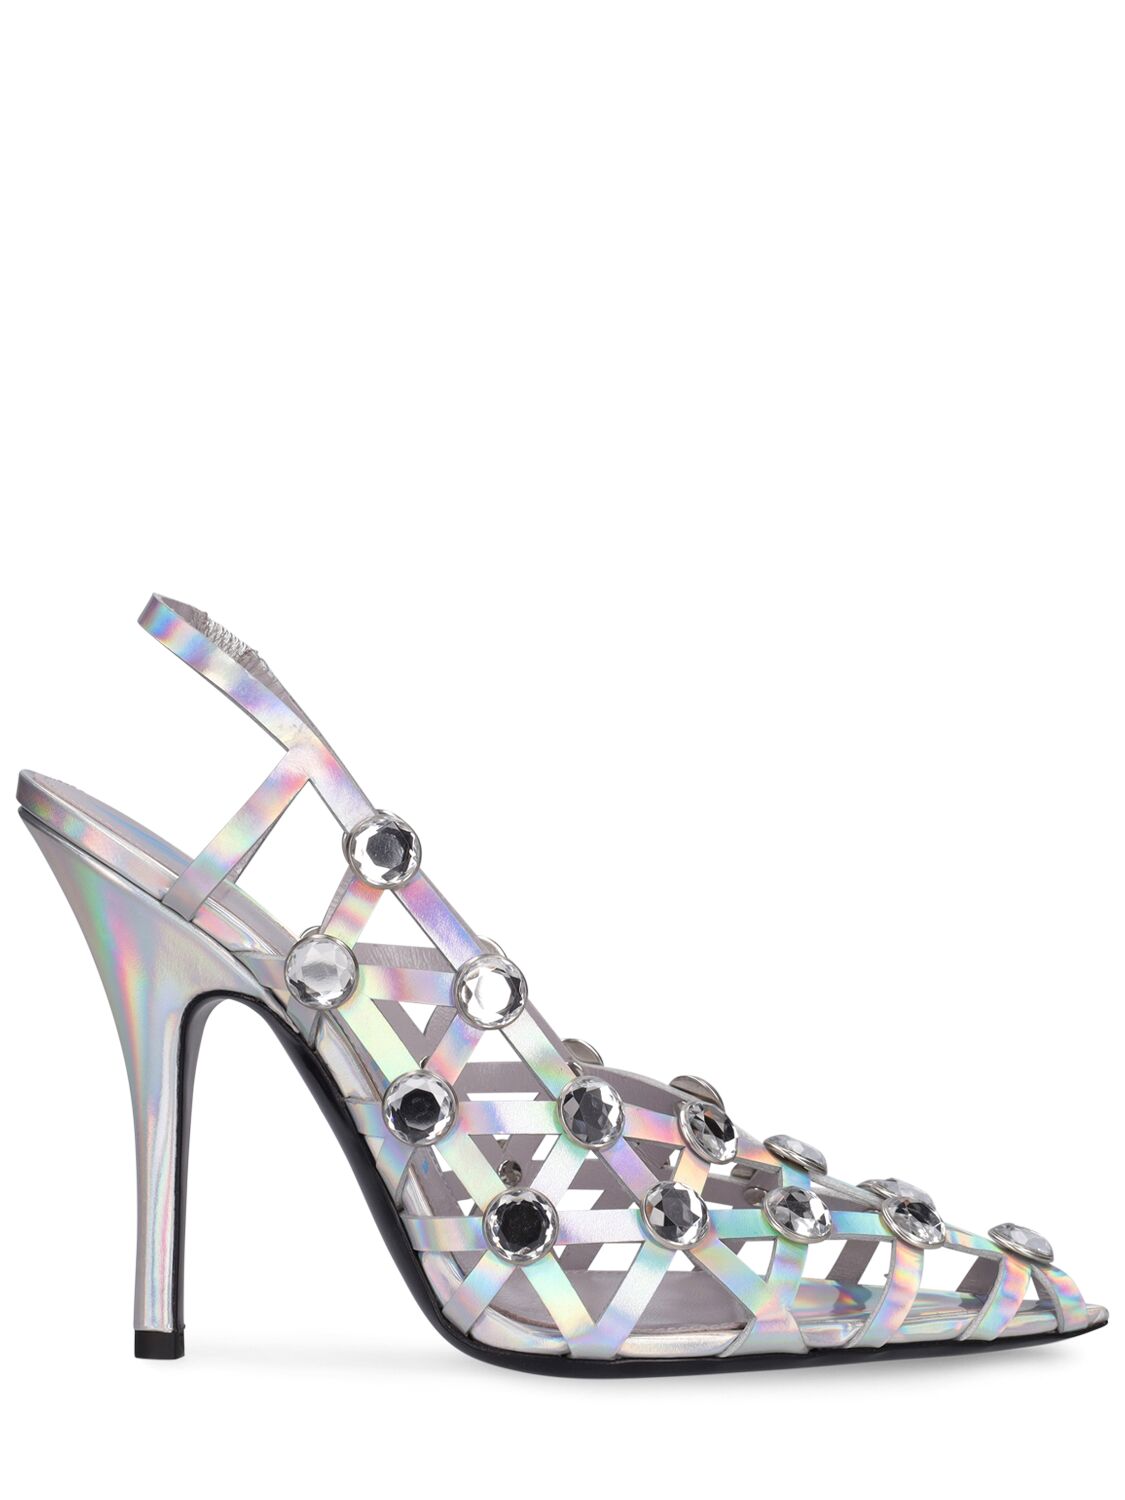 Attico 105mm Grid Laminated Leather Slingbacks In Holographic Silver